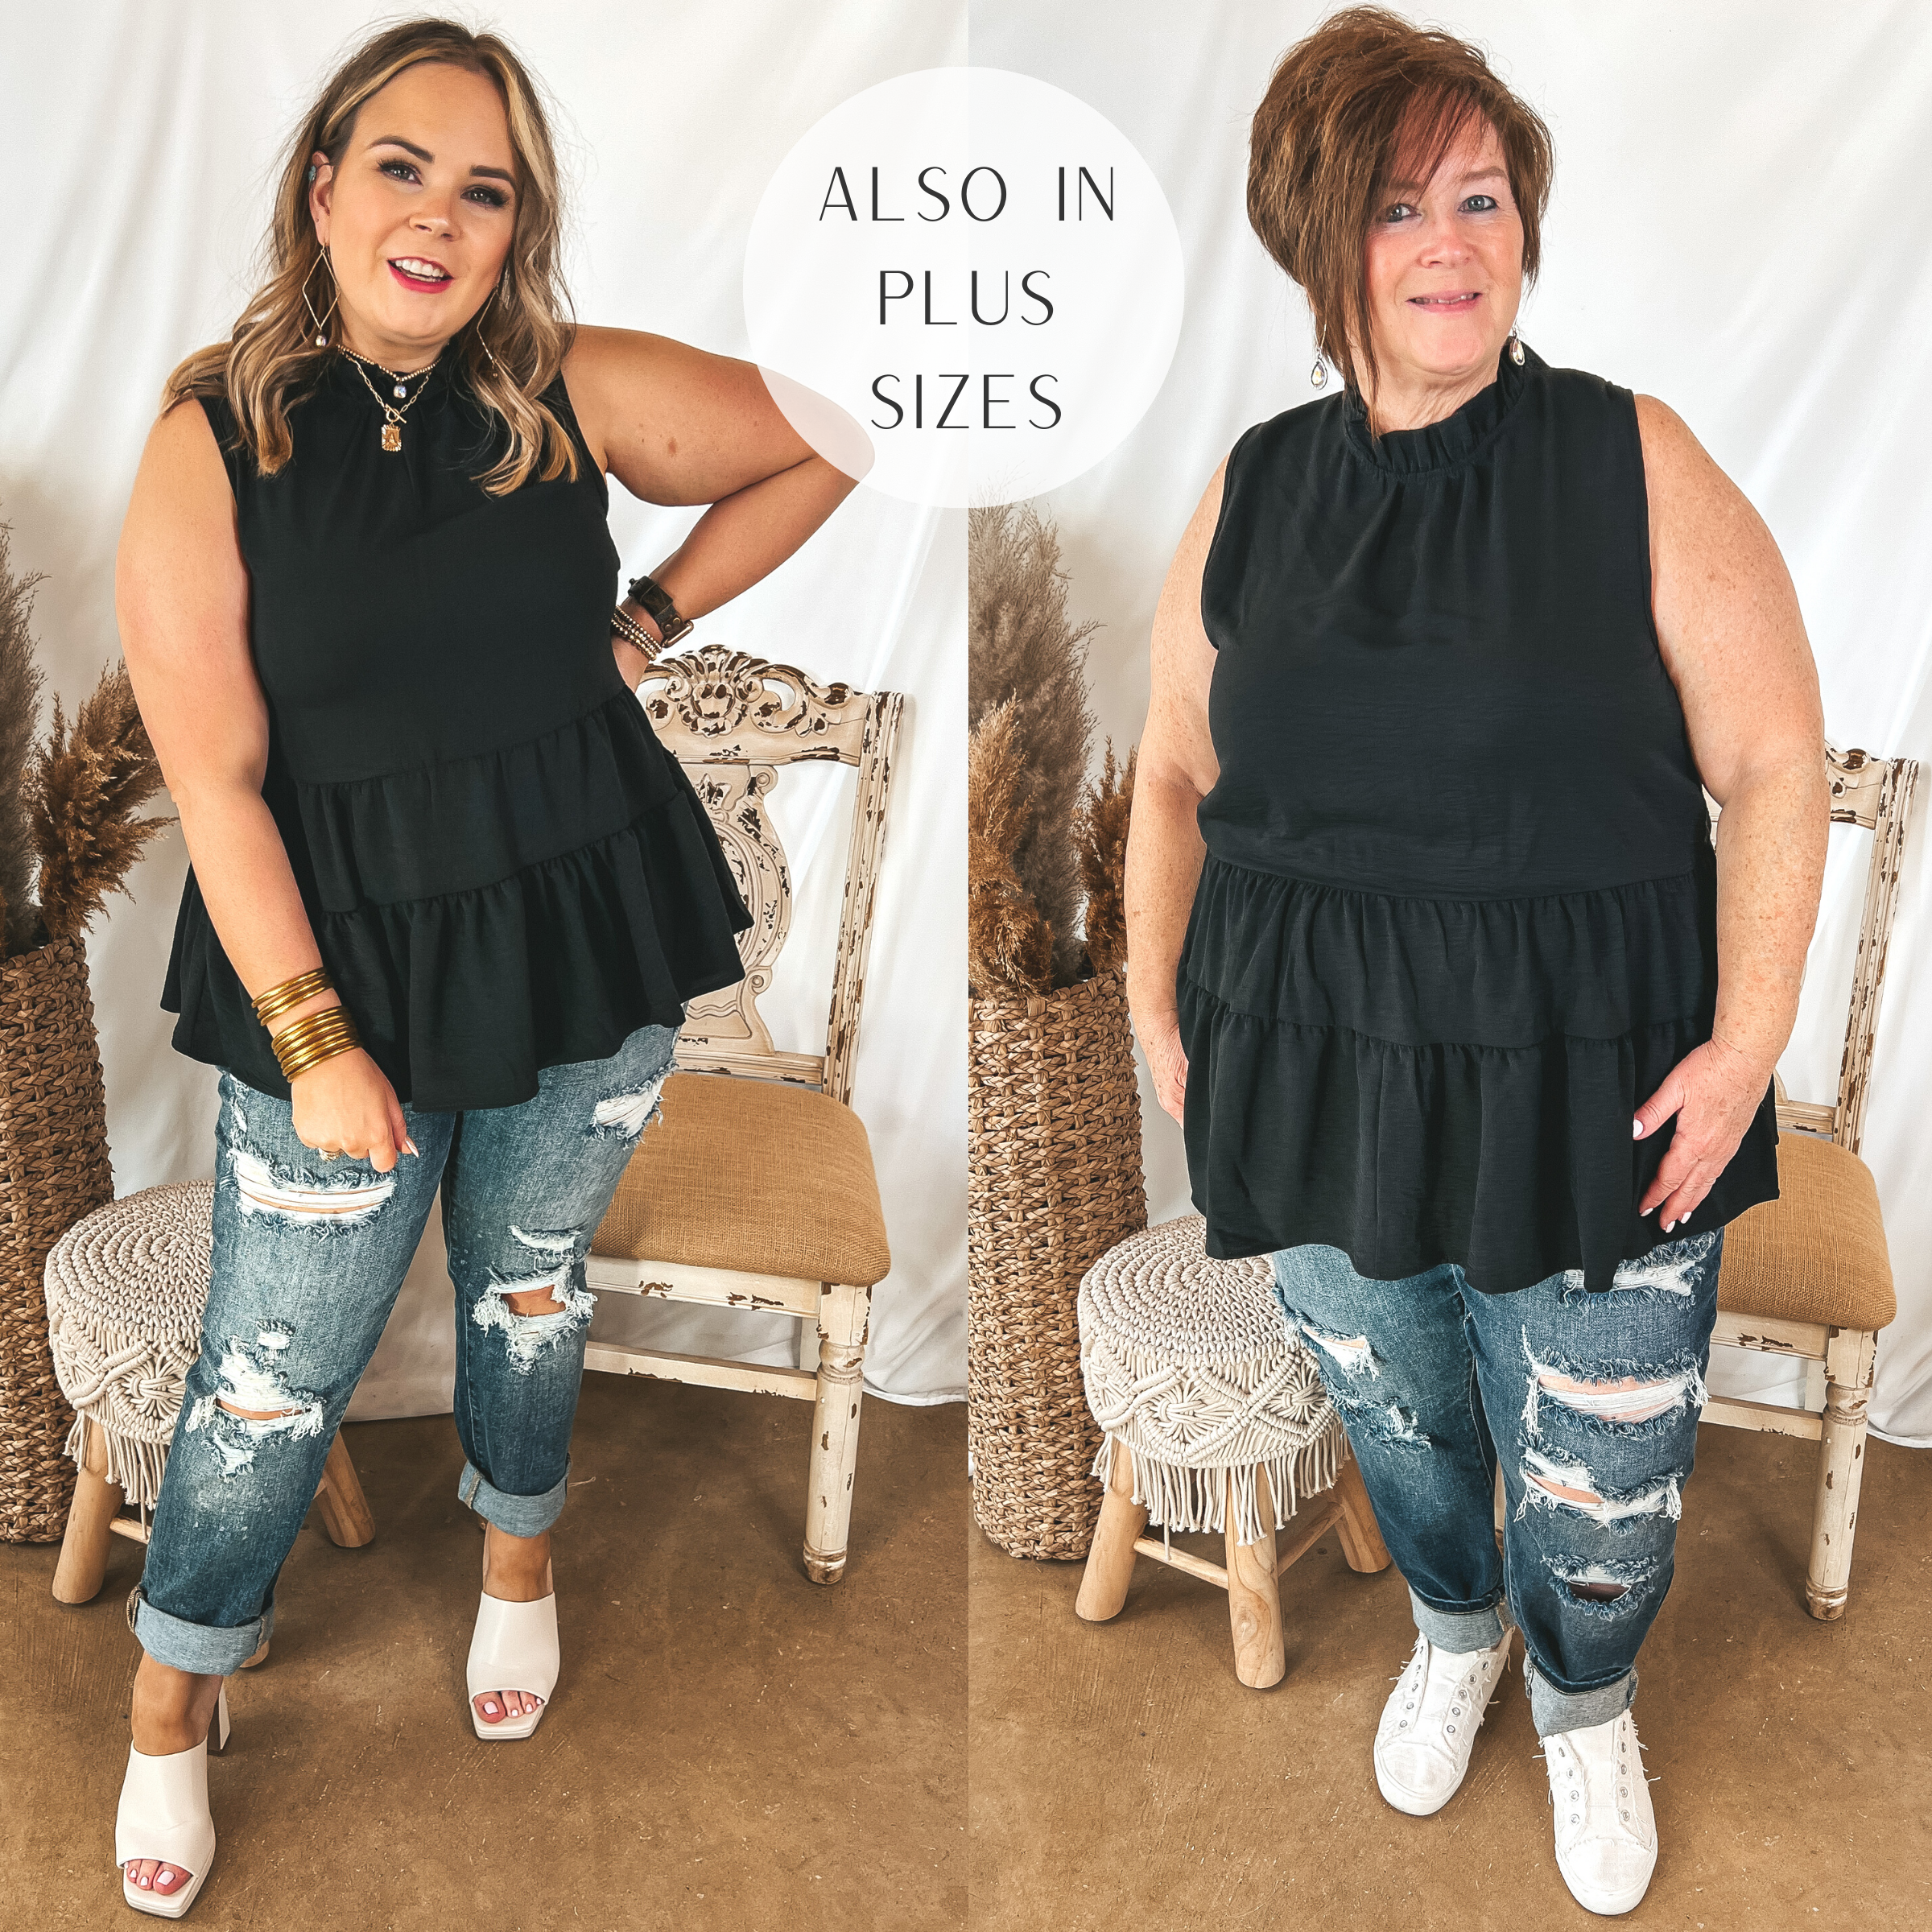 Models are wearing a black high neck tank top with a ruffle tiered body. Size large model has it paired with distressed jeans, white heels, and gold jewelry. Plus size model has it paired with distressed jeans, white sneakers, and silver jewelry.